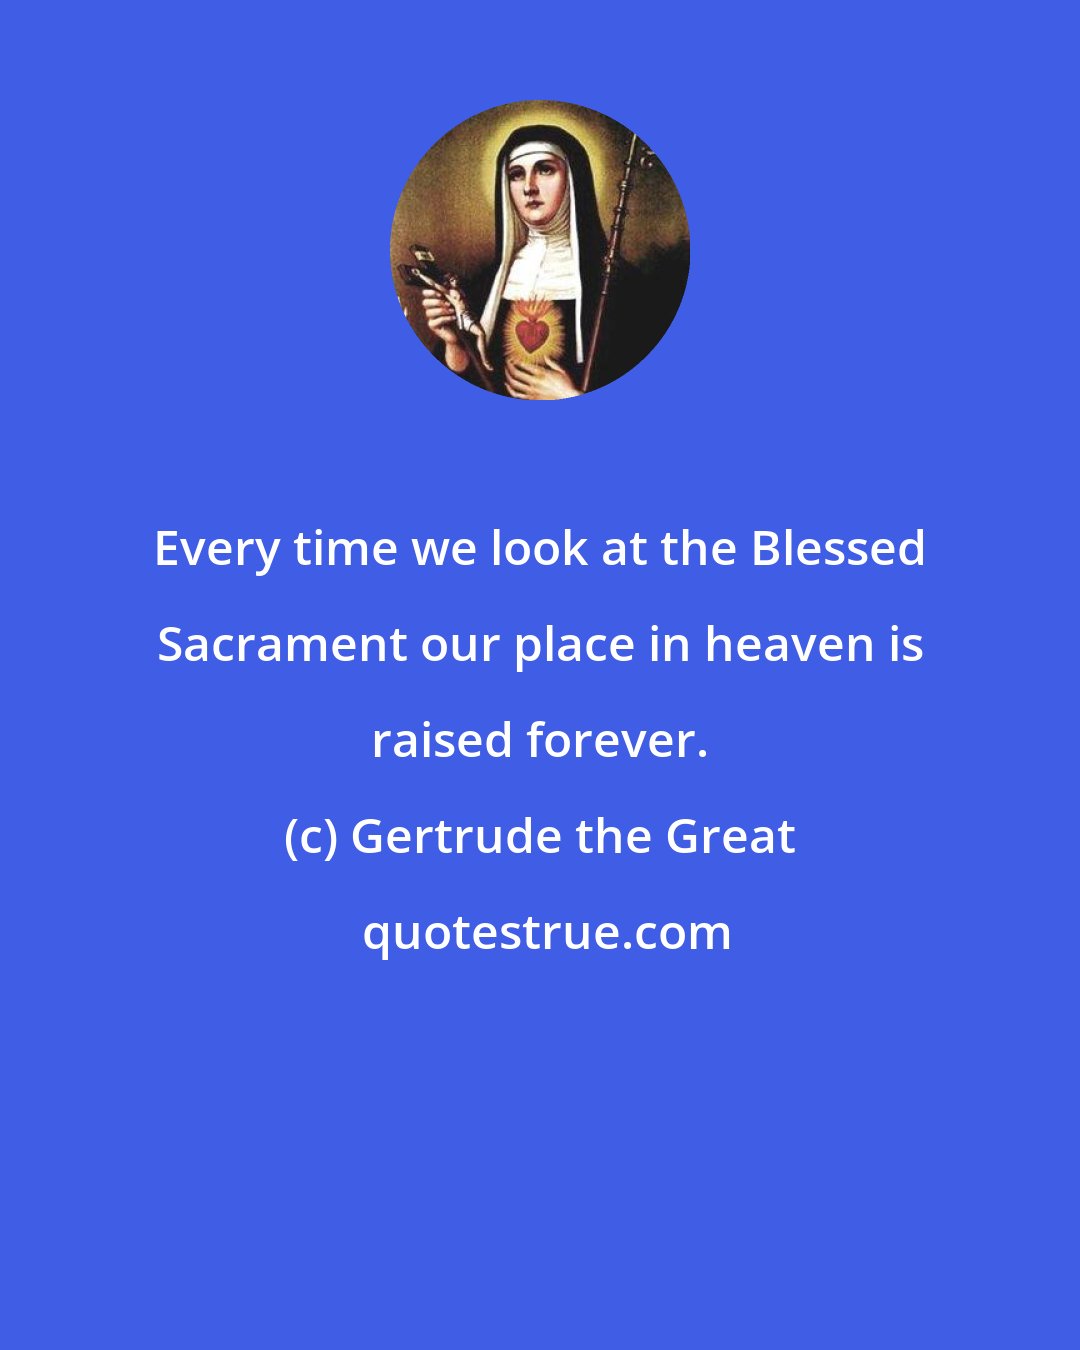 Gertrude the Great: Every time we look at the Blessed Sacrament our place in heaven is raised forever.